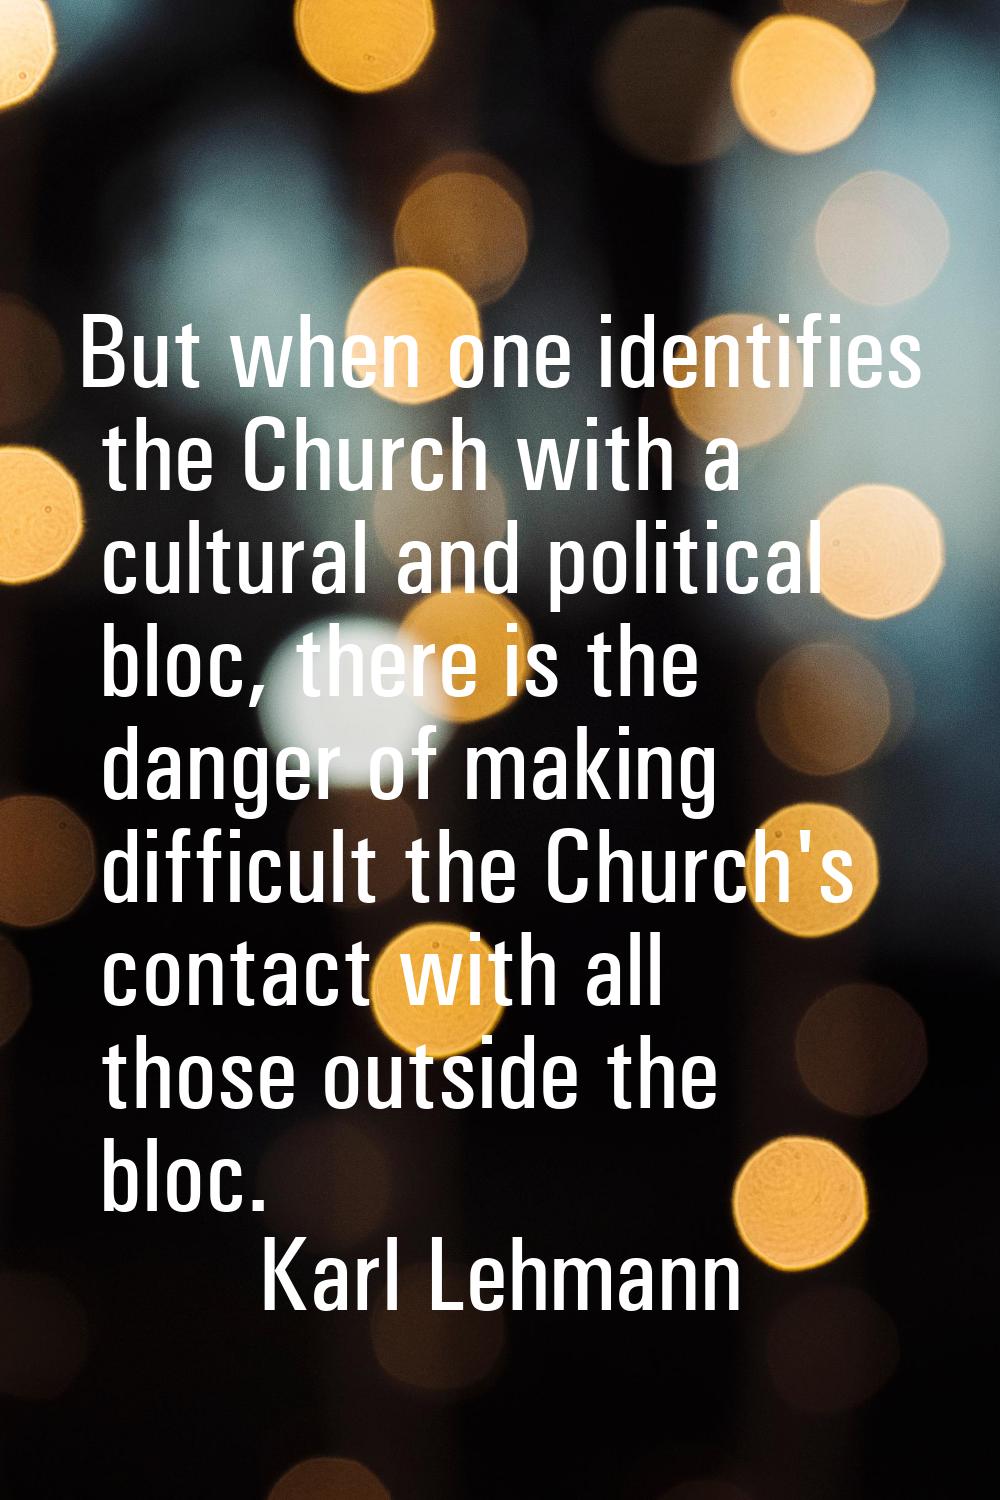 But when one identifies the Church with a cultural and political bloc, there is the danger of makin